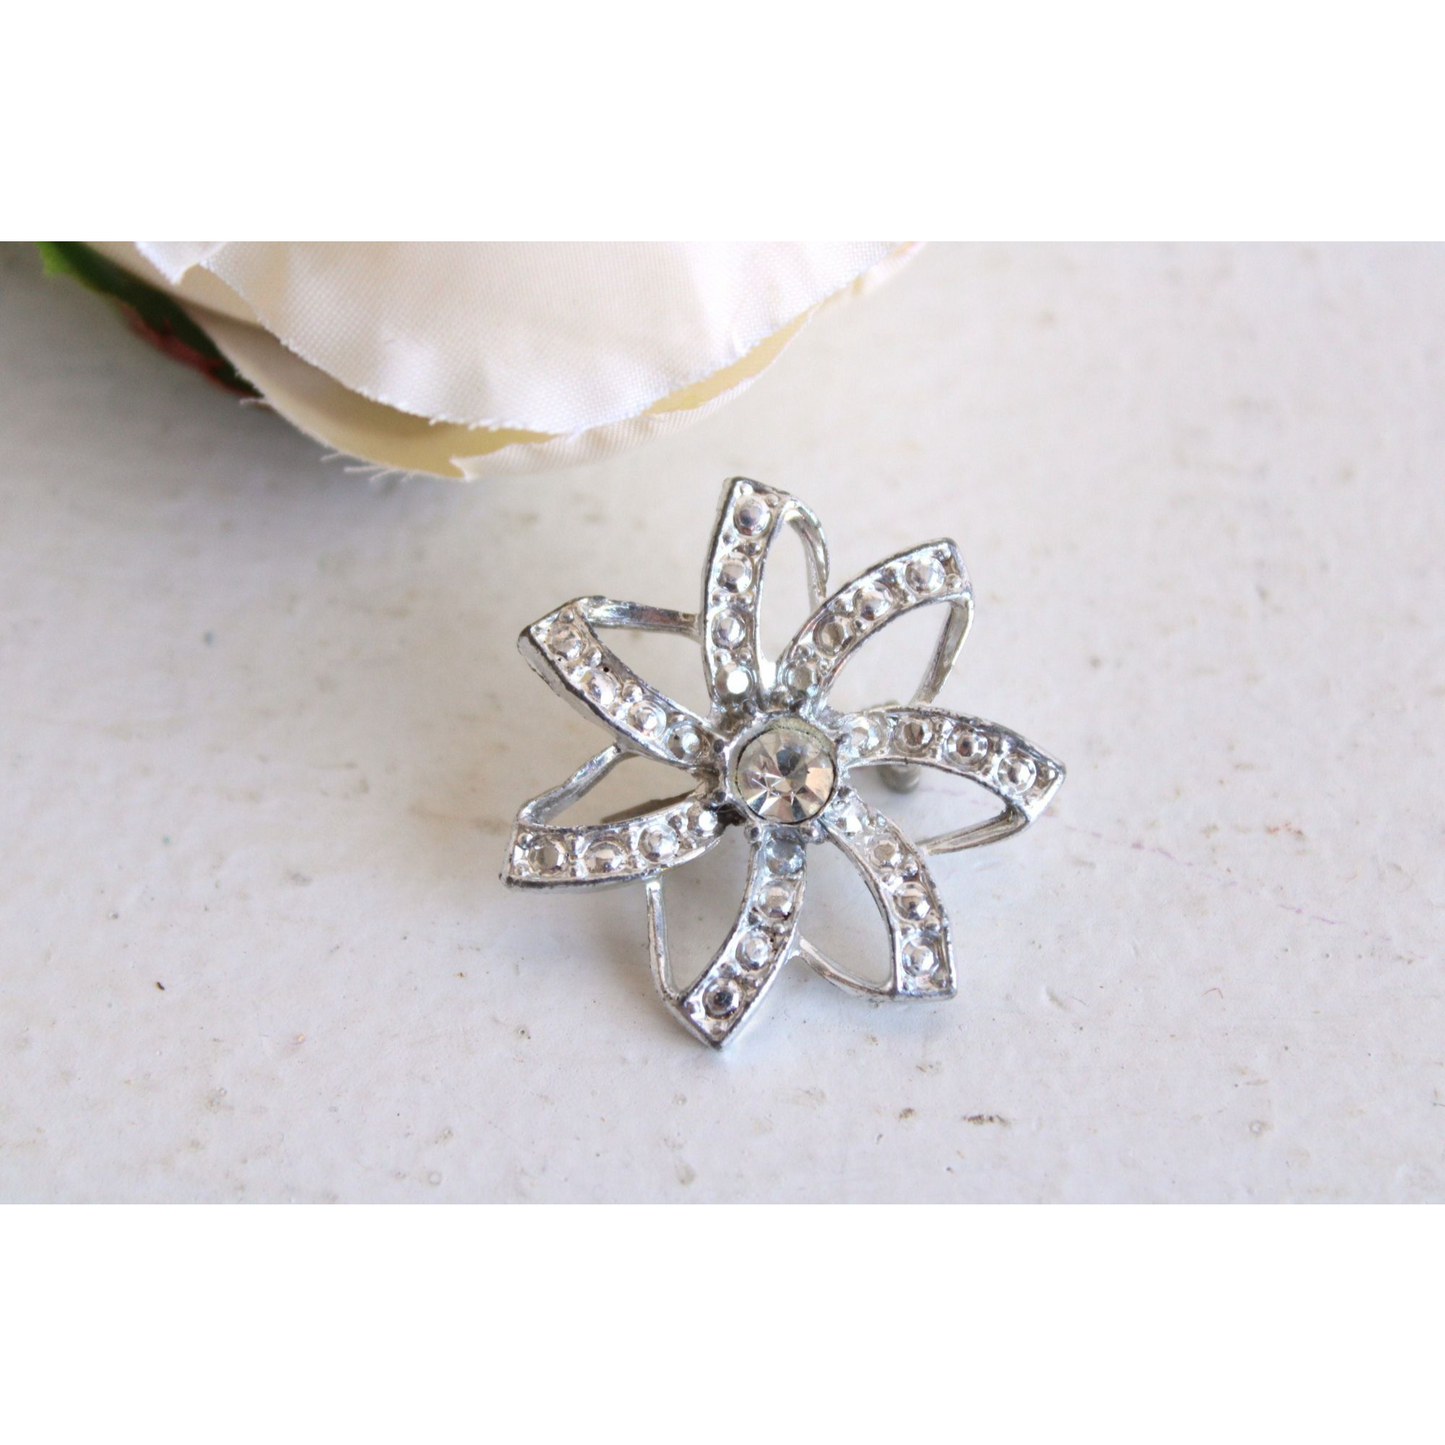 Vintage 1950s 1960s Flower Pin